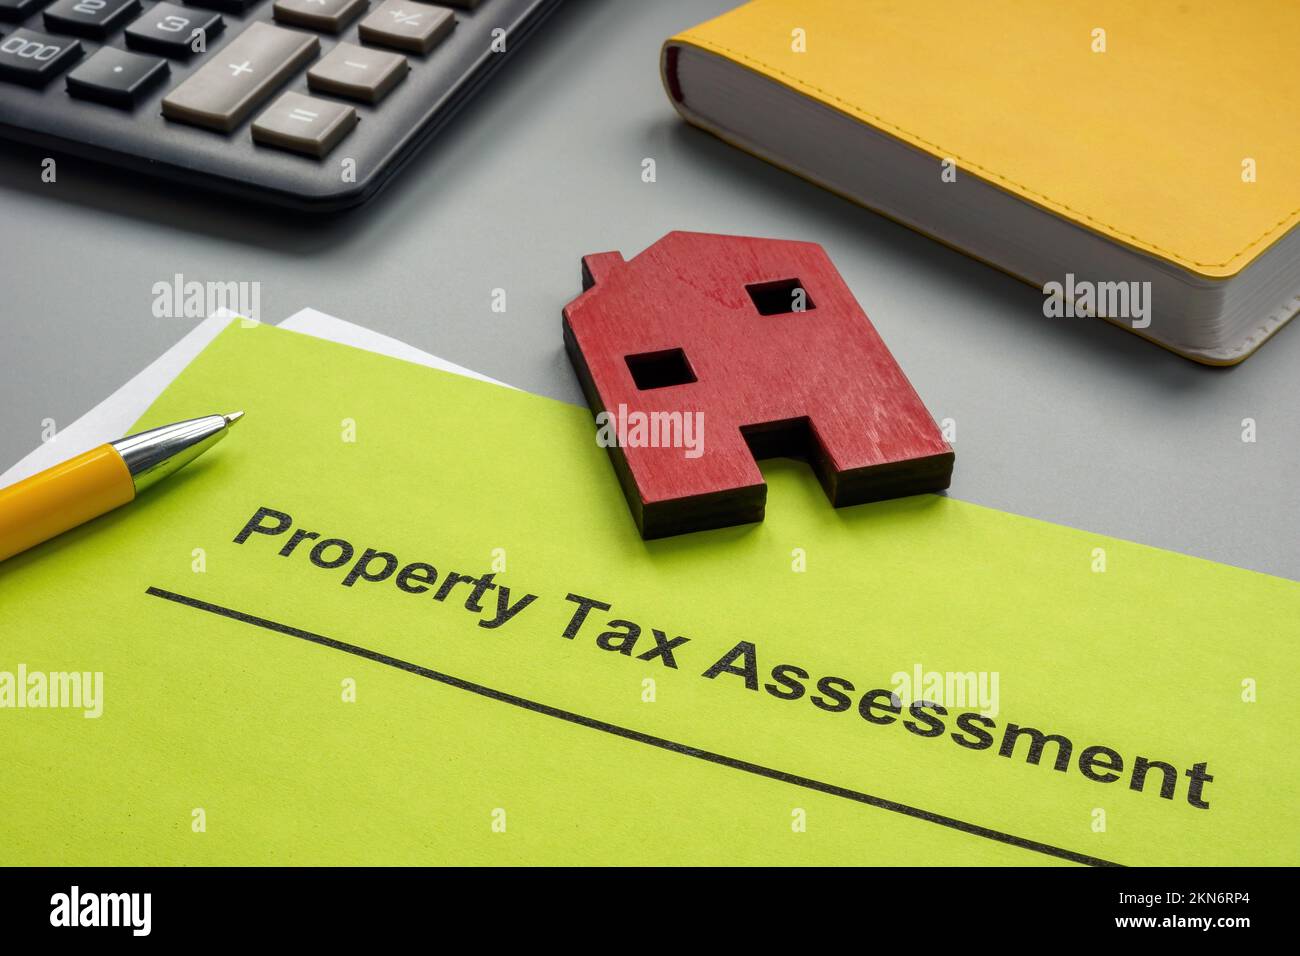 Property tax assessment papers and model of house. Stock Photo